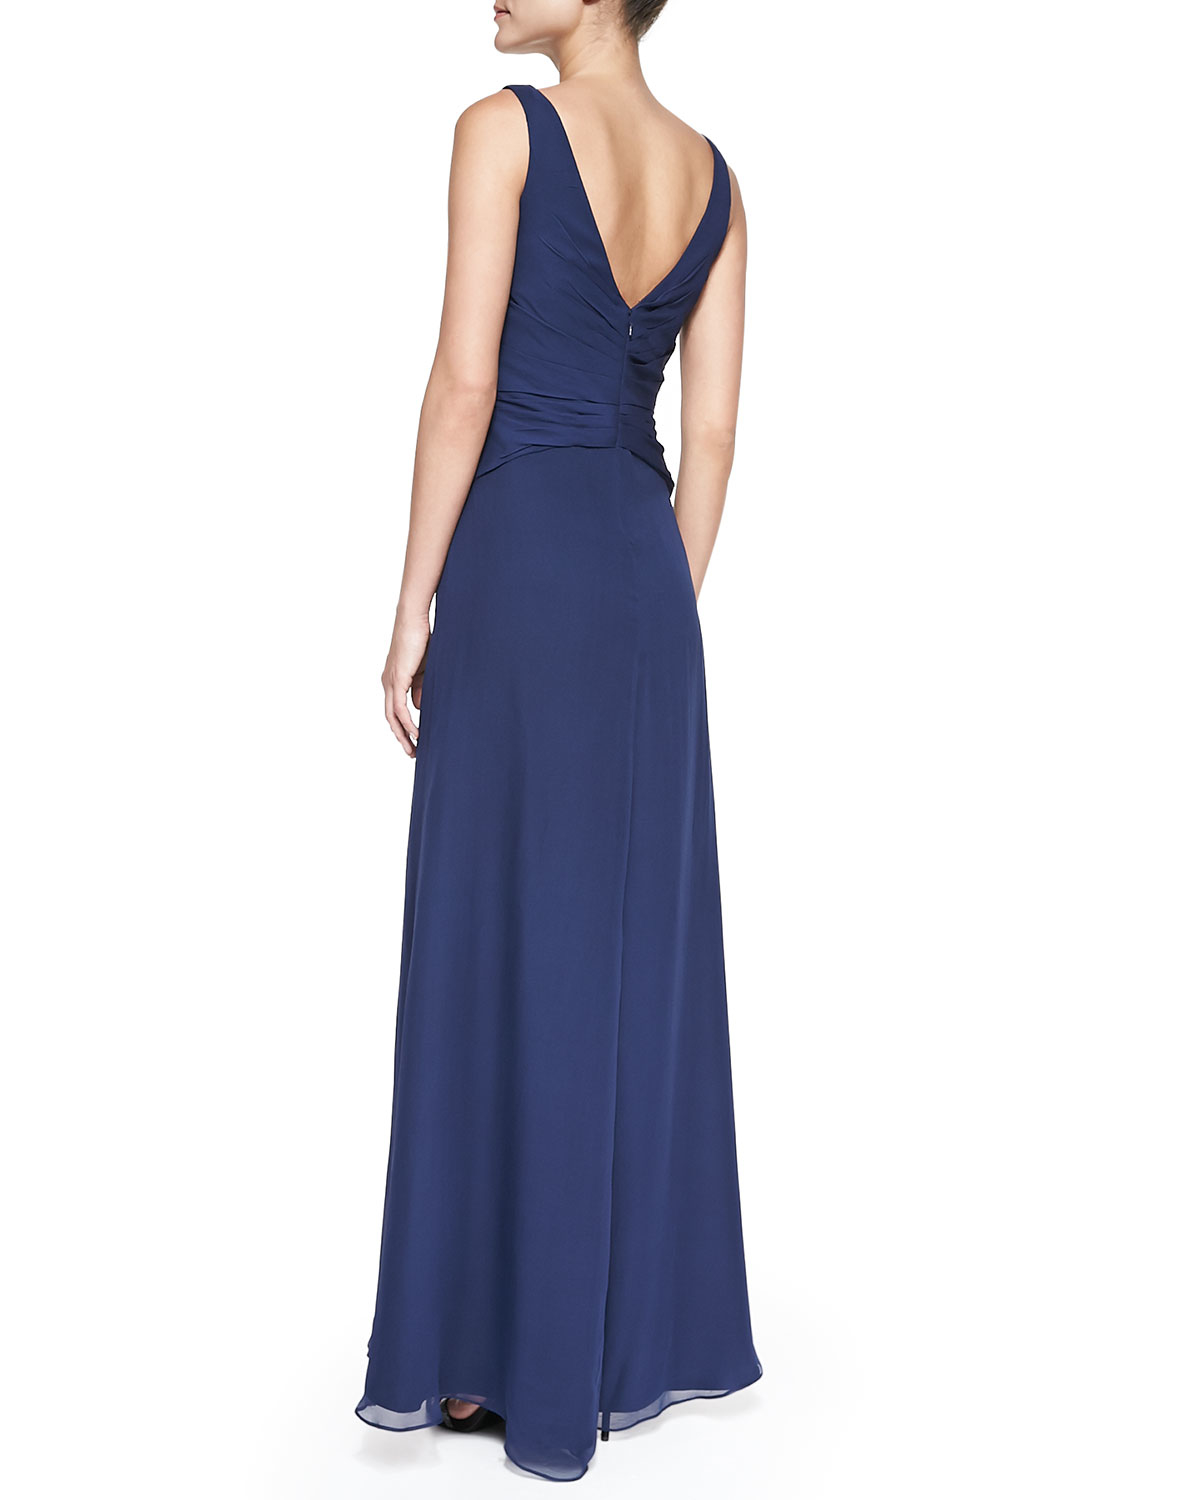 Lyst - Monique Lhuillier Bridesmaids V-neck Chiffon Ruffled Gown in Blue